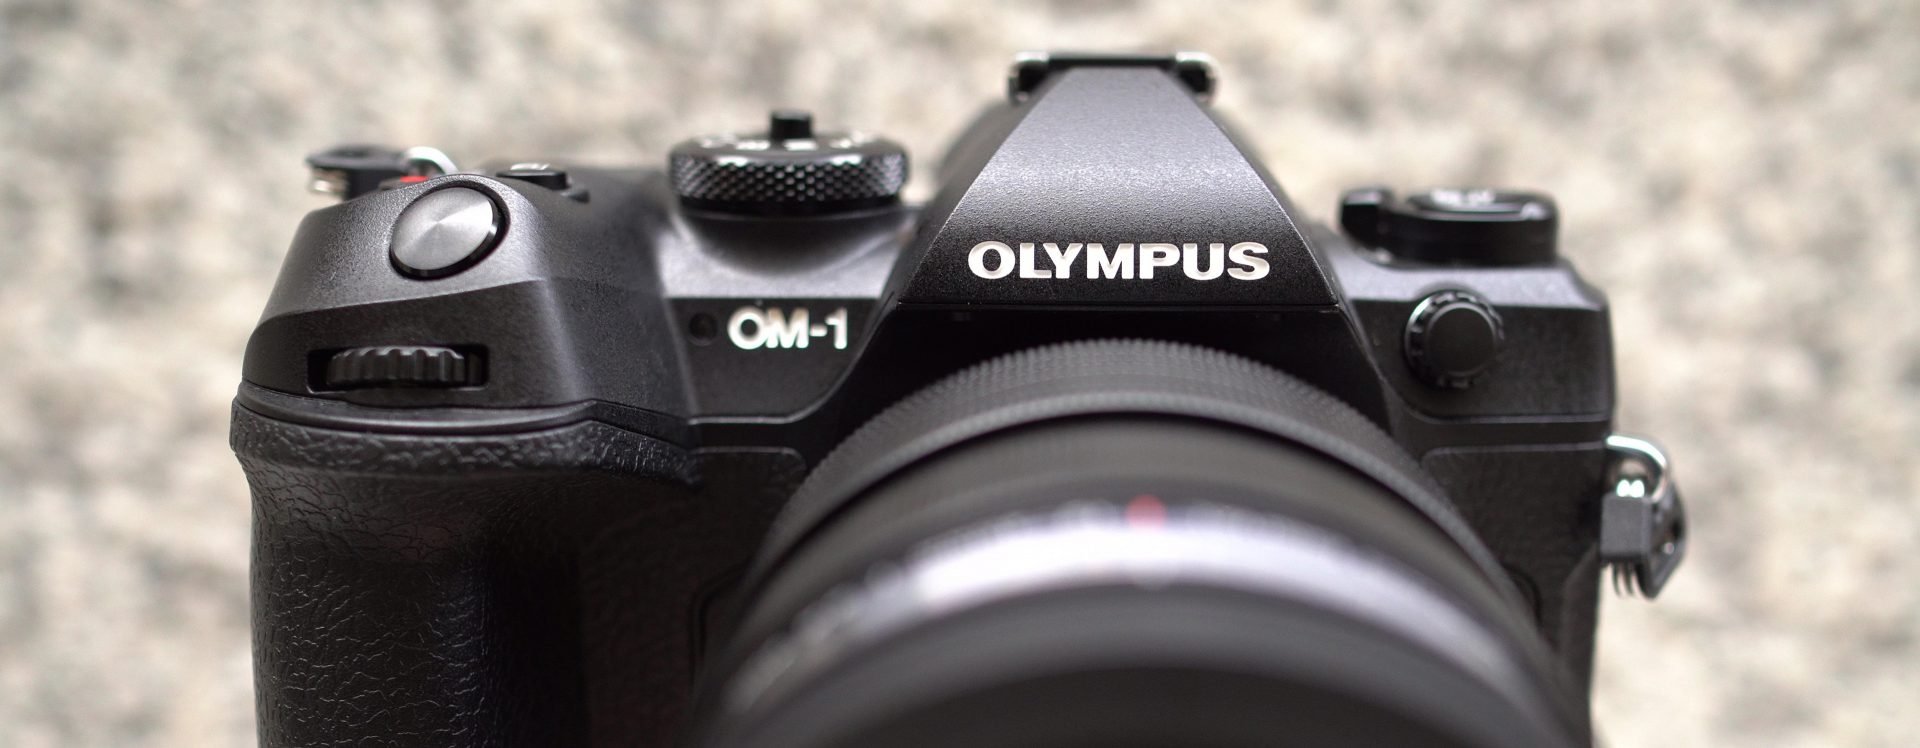 OLYMPUS OM System Manual For Flash Photography 